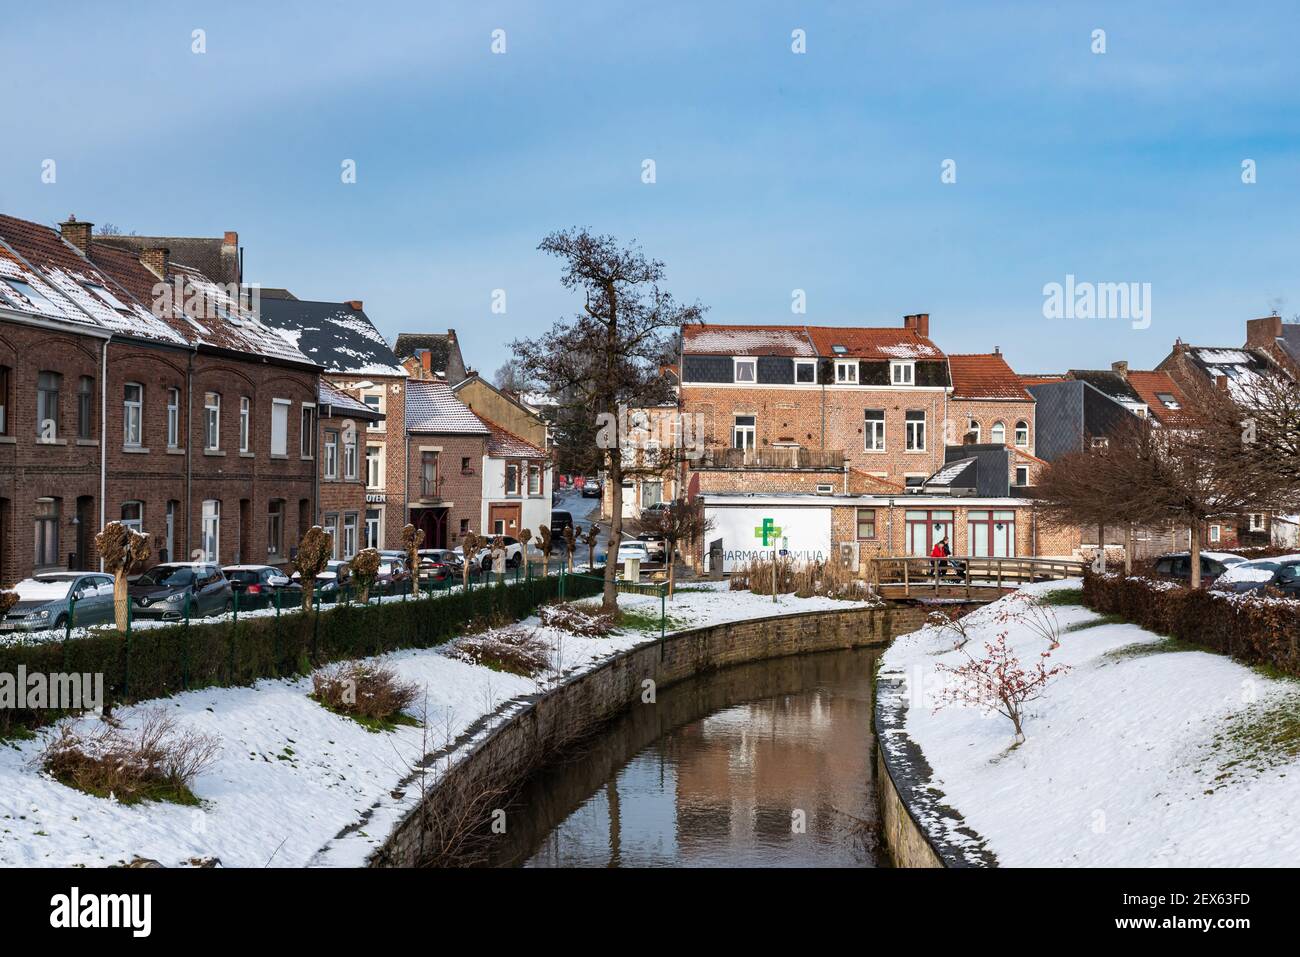 Jodoigne, Wallonia - Belgium - 01 23  2021: Scenic view over the Gete river reflecting Old Town buildings Stock Photo